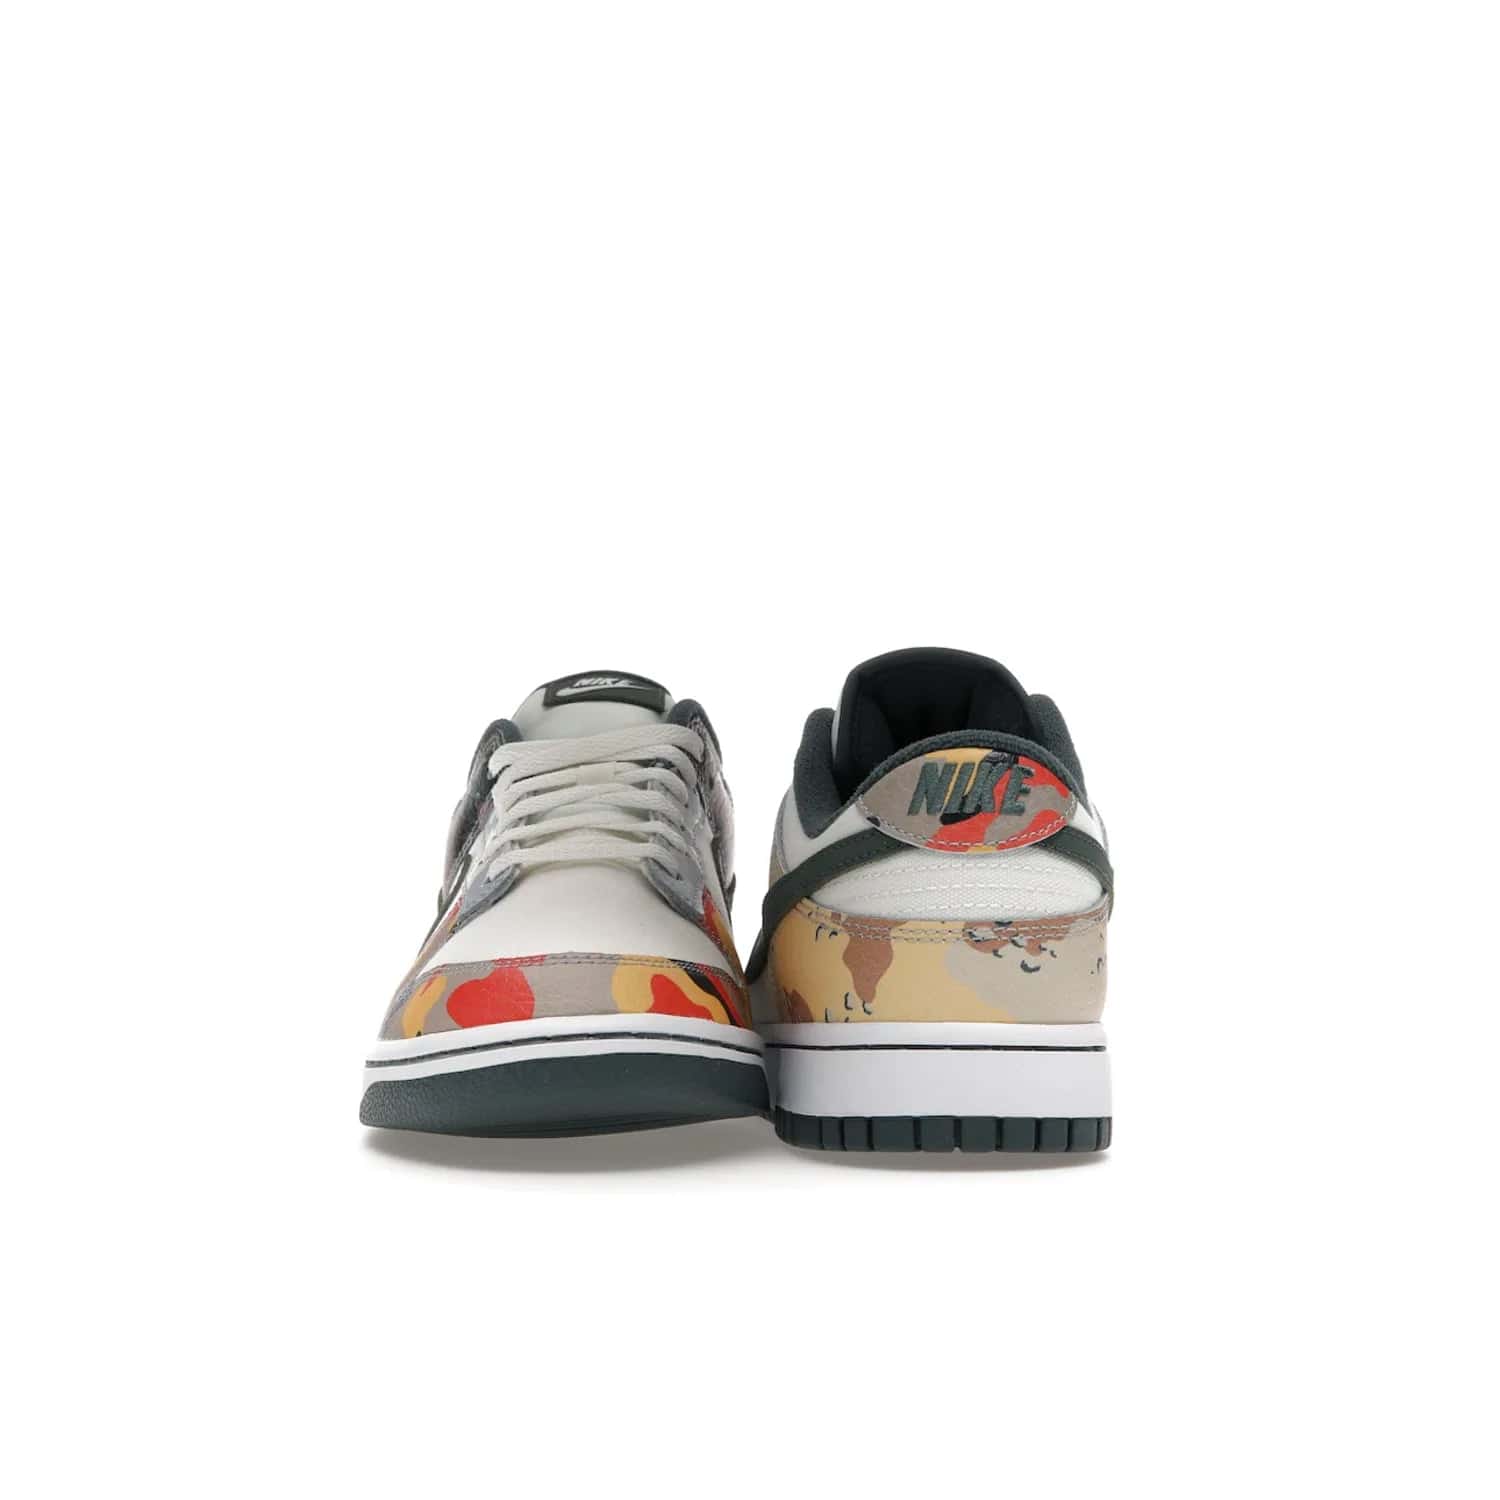 Nike Dunk Low SE Sail Multi-Camo - Image 10 - Only at www.BallersClubKickz.com - Classic design meets statement style in the Nike Dunk Low SE Sail Multi-Camo. White leather base with multi-color camo overlays, vibrant Nike Swooshes, and orange Nike embroidery. Get yours August 2021.